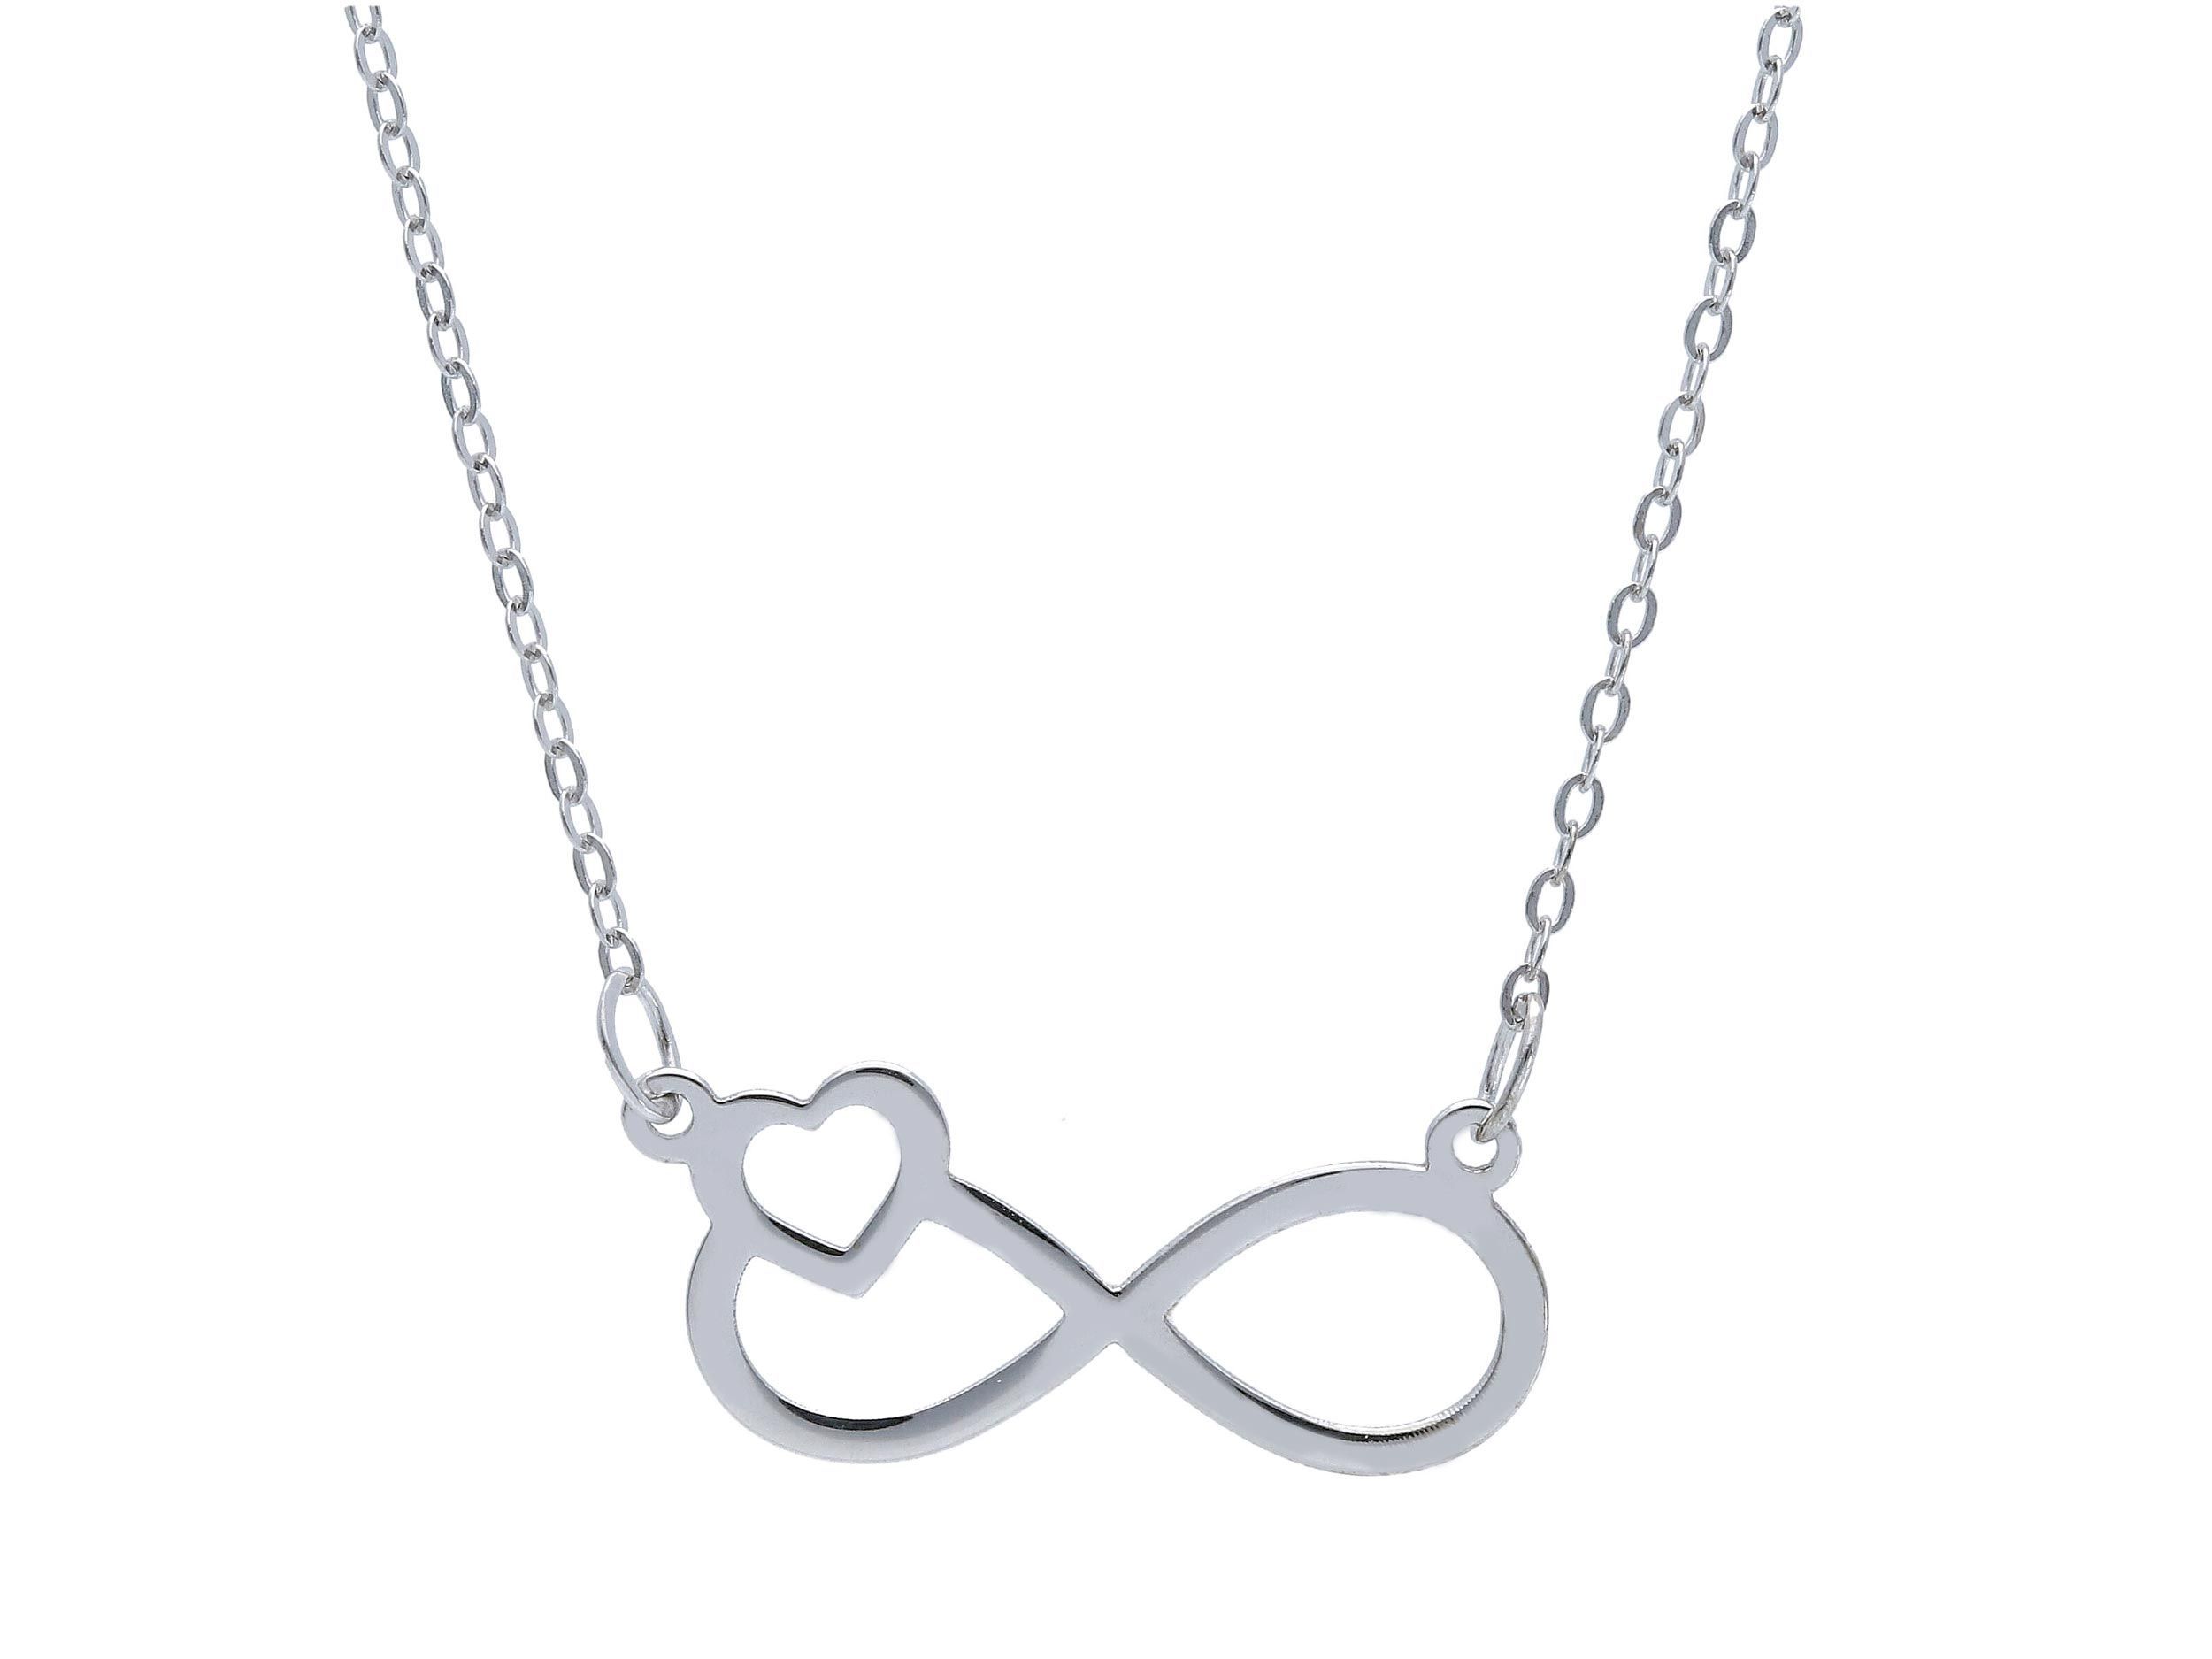 White gold necklace with the infinity symbol k9 (code S249368)